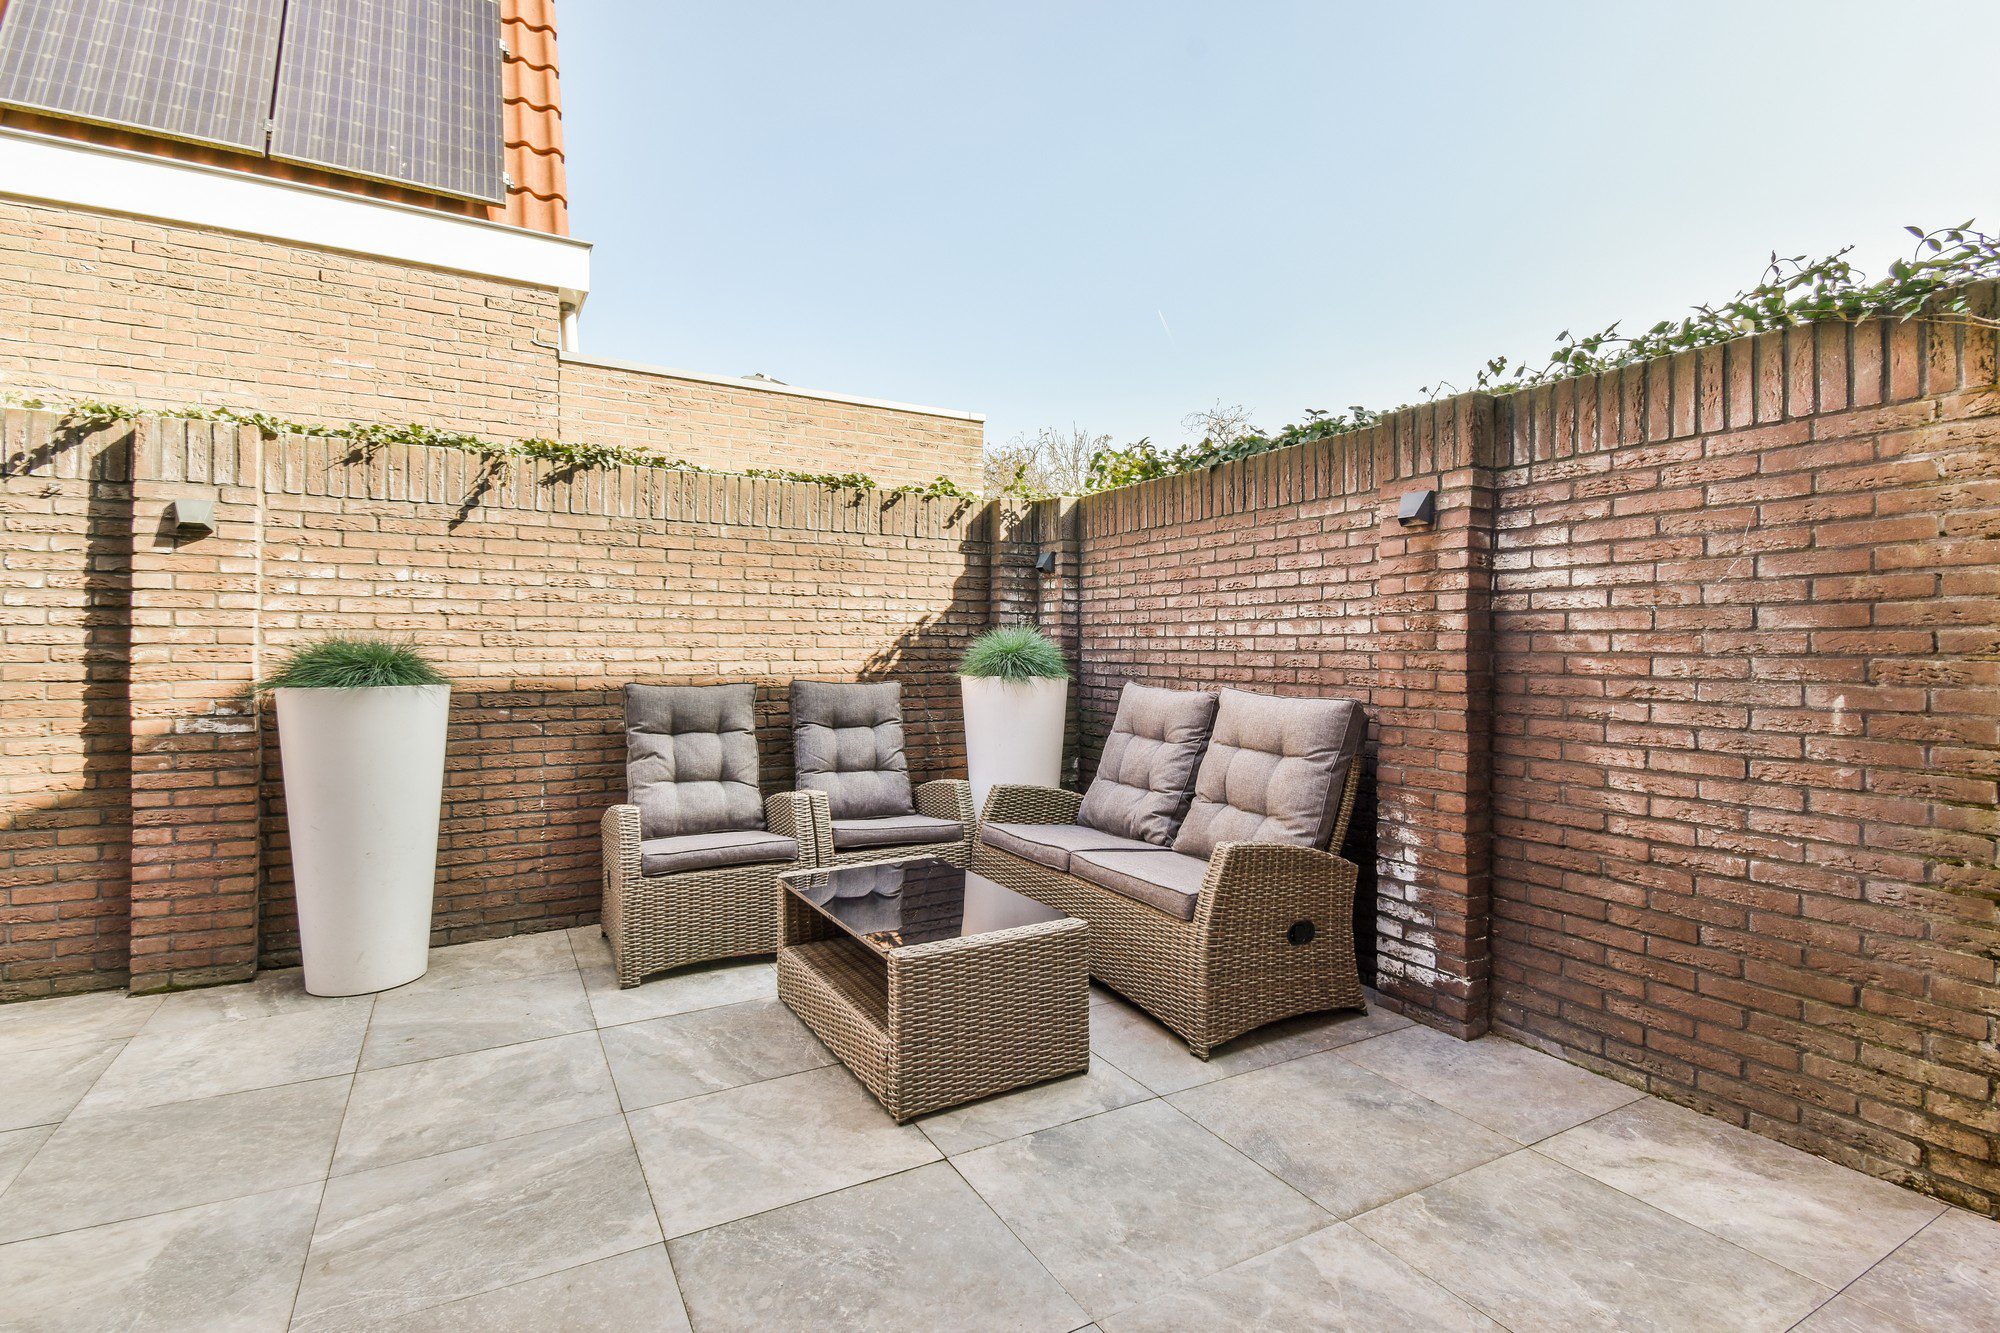 This image shows an outdoor patio area enclosed by brick walls. There is a set of modern patio furniture that includes two single armchairs, one double sofa, and a low table, all made with woven materials resembling rattan and topped with gray cushions. There's a tall white planter with a green plant in the corner. The floor is tiled with large, smooth paving stones, and there are climbing plants along the back wall. The sky is clear, indicating a sunny day, and the sun is casting shadows on the walls, highlighting the texture of the bricks. The corner of a building with a red roof and solar panels is visible at the top left corner, suggesting the patio might be adjacent to a residential home.